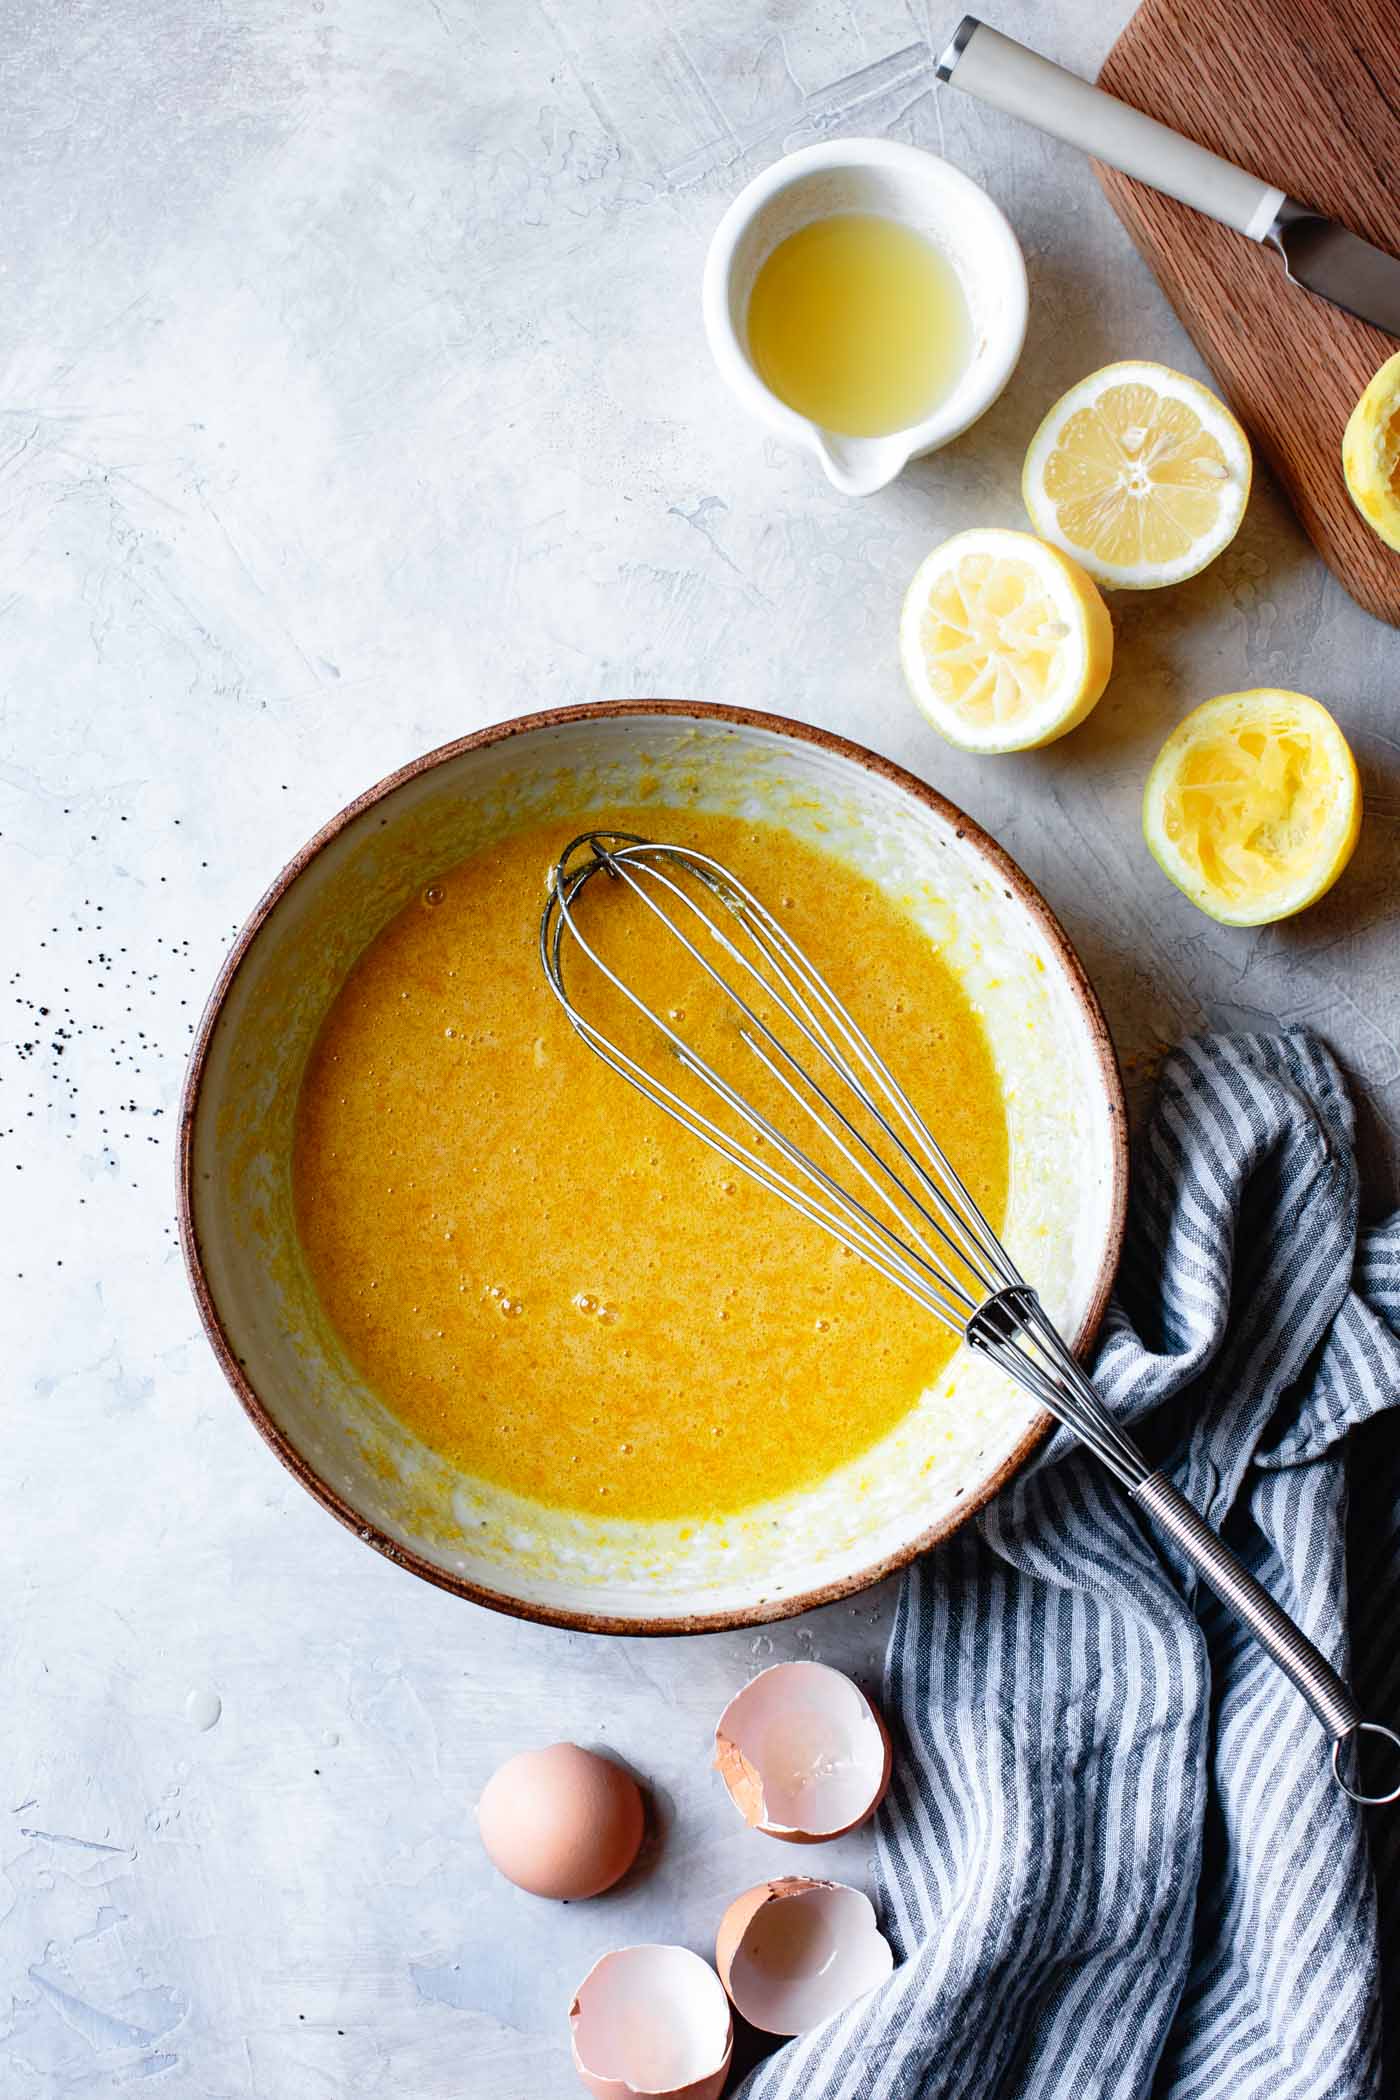 The eggs and lemon sugar have been whisked together in a bowl